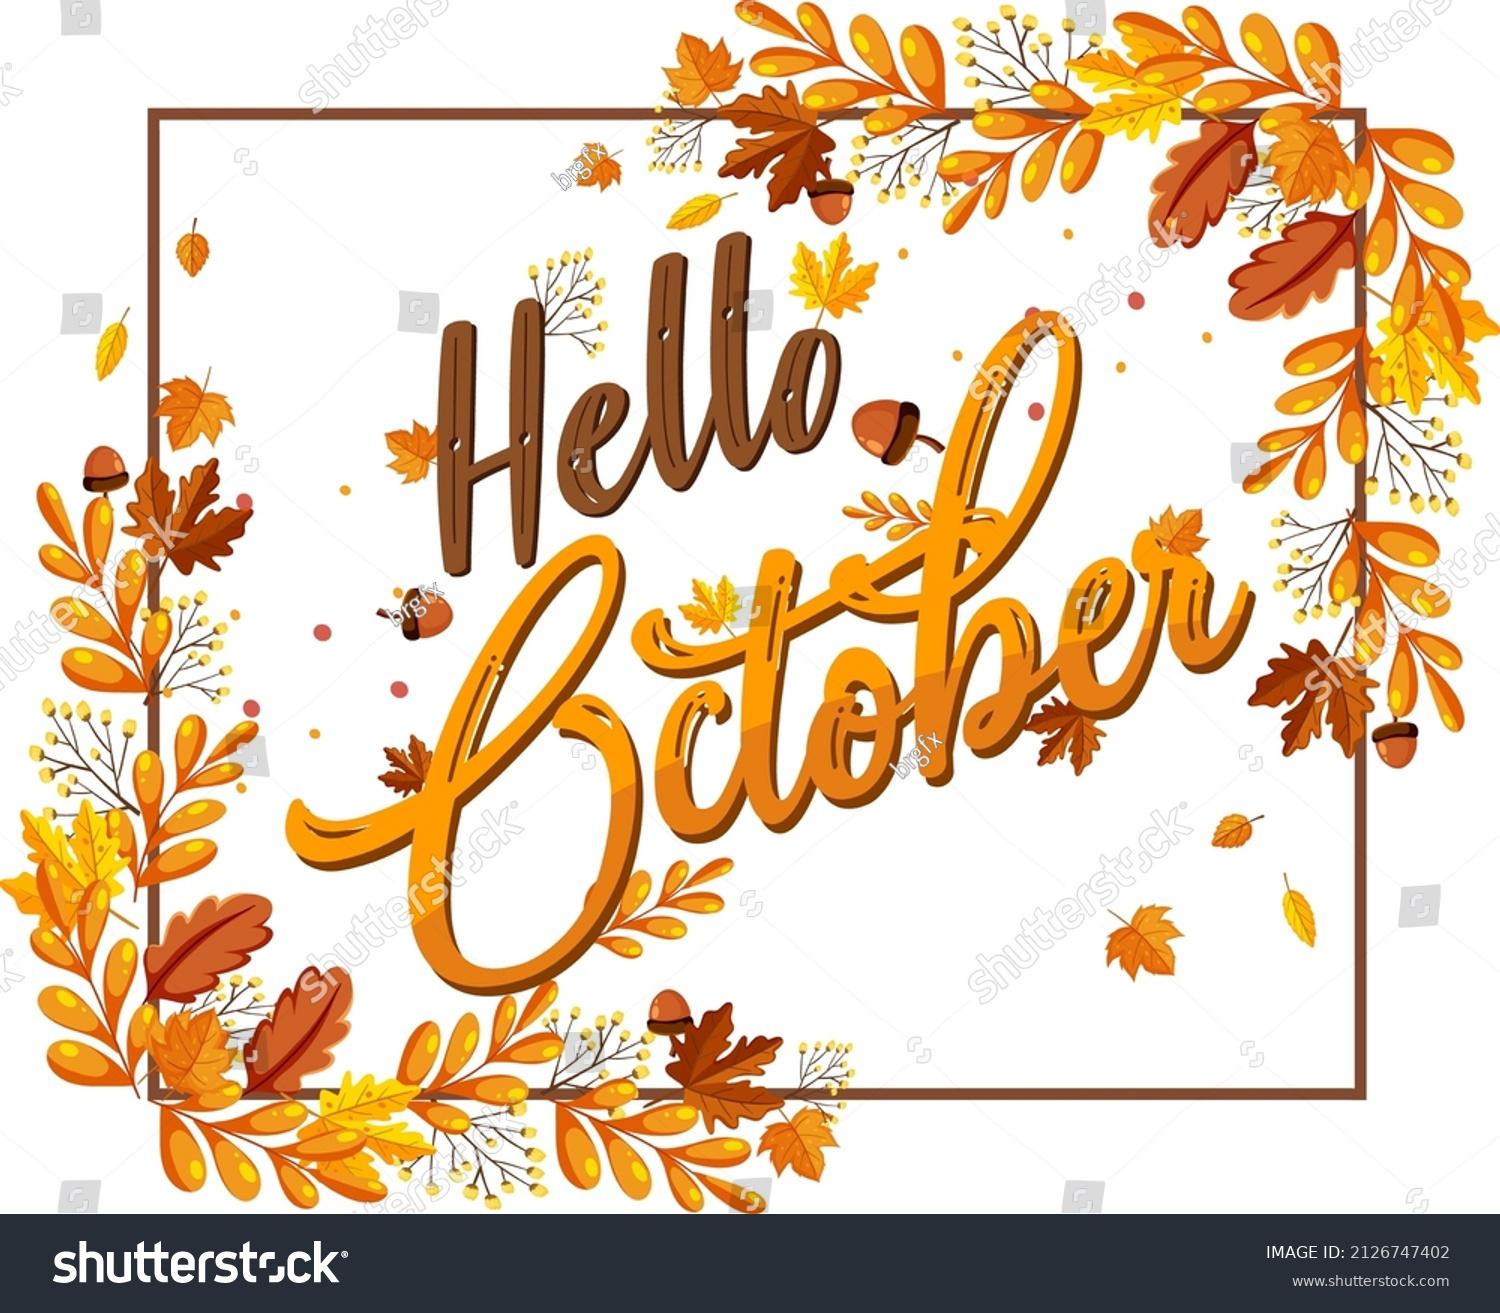 1537 Hello October Images Images Stock Photos Vectors